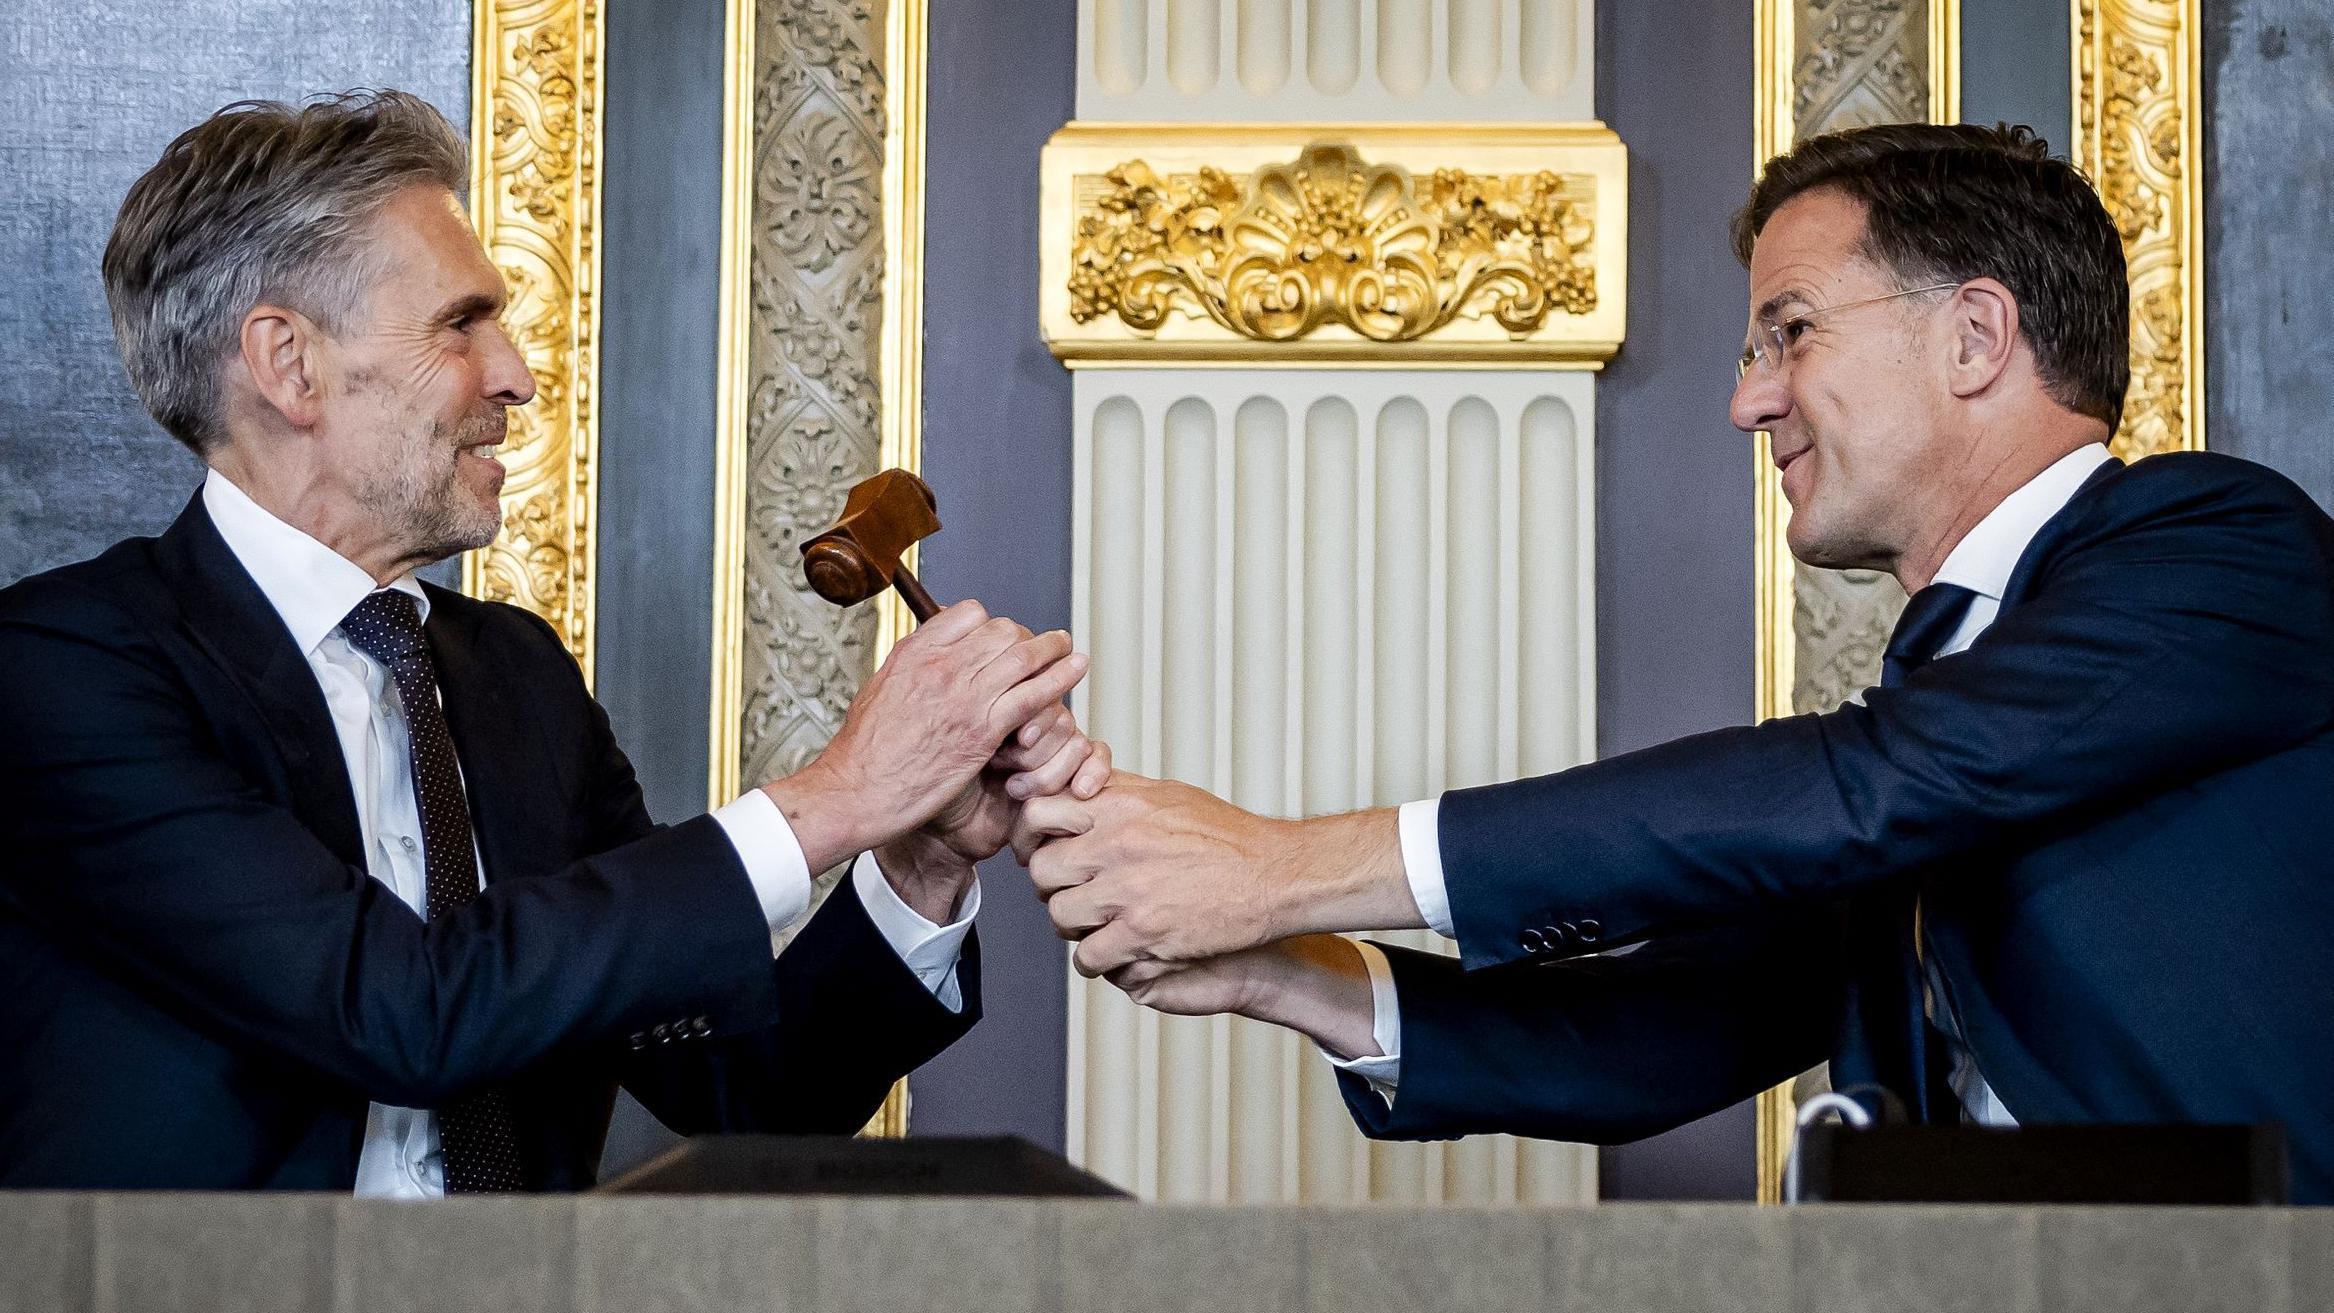 Dutch government sworn in after Wilders election win